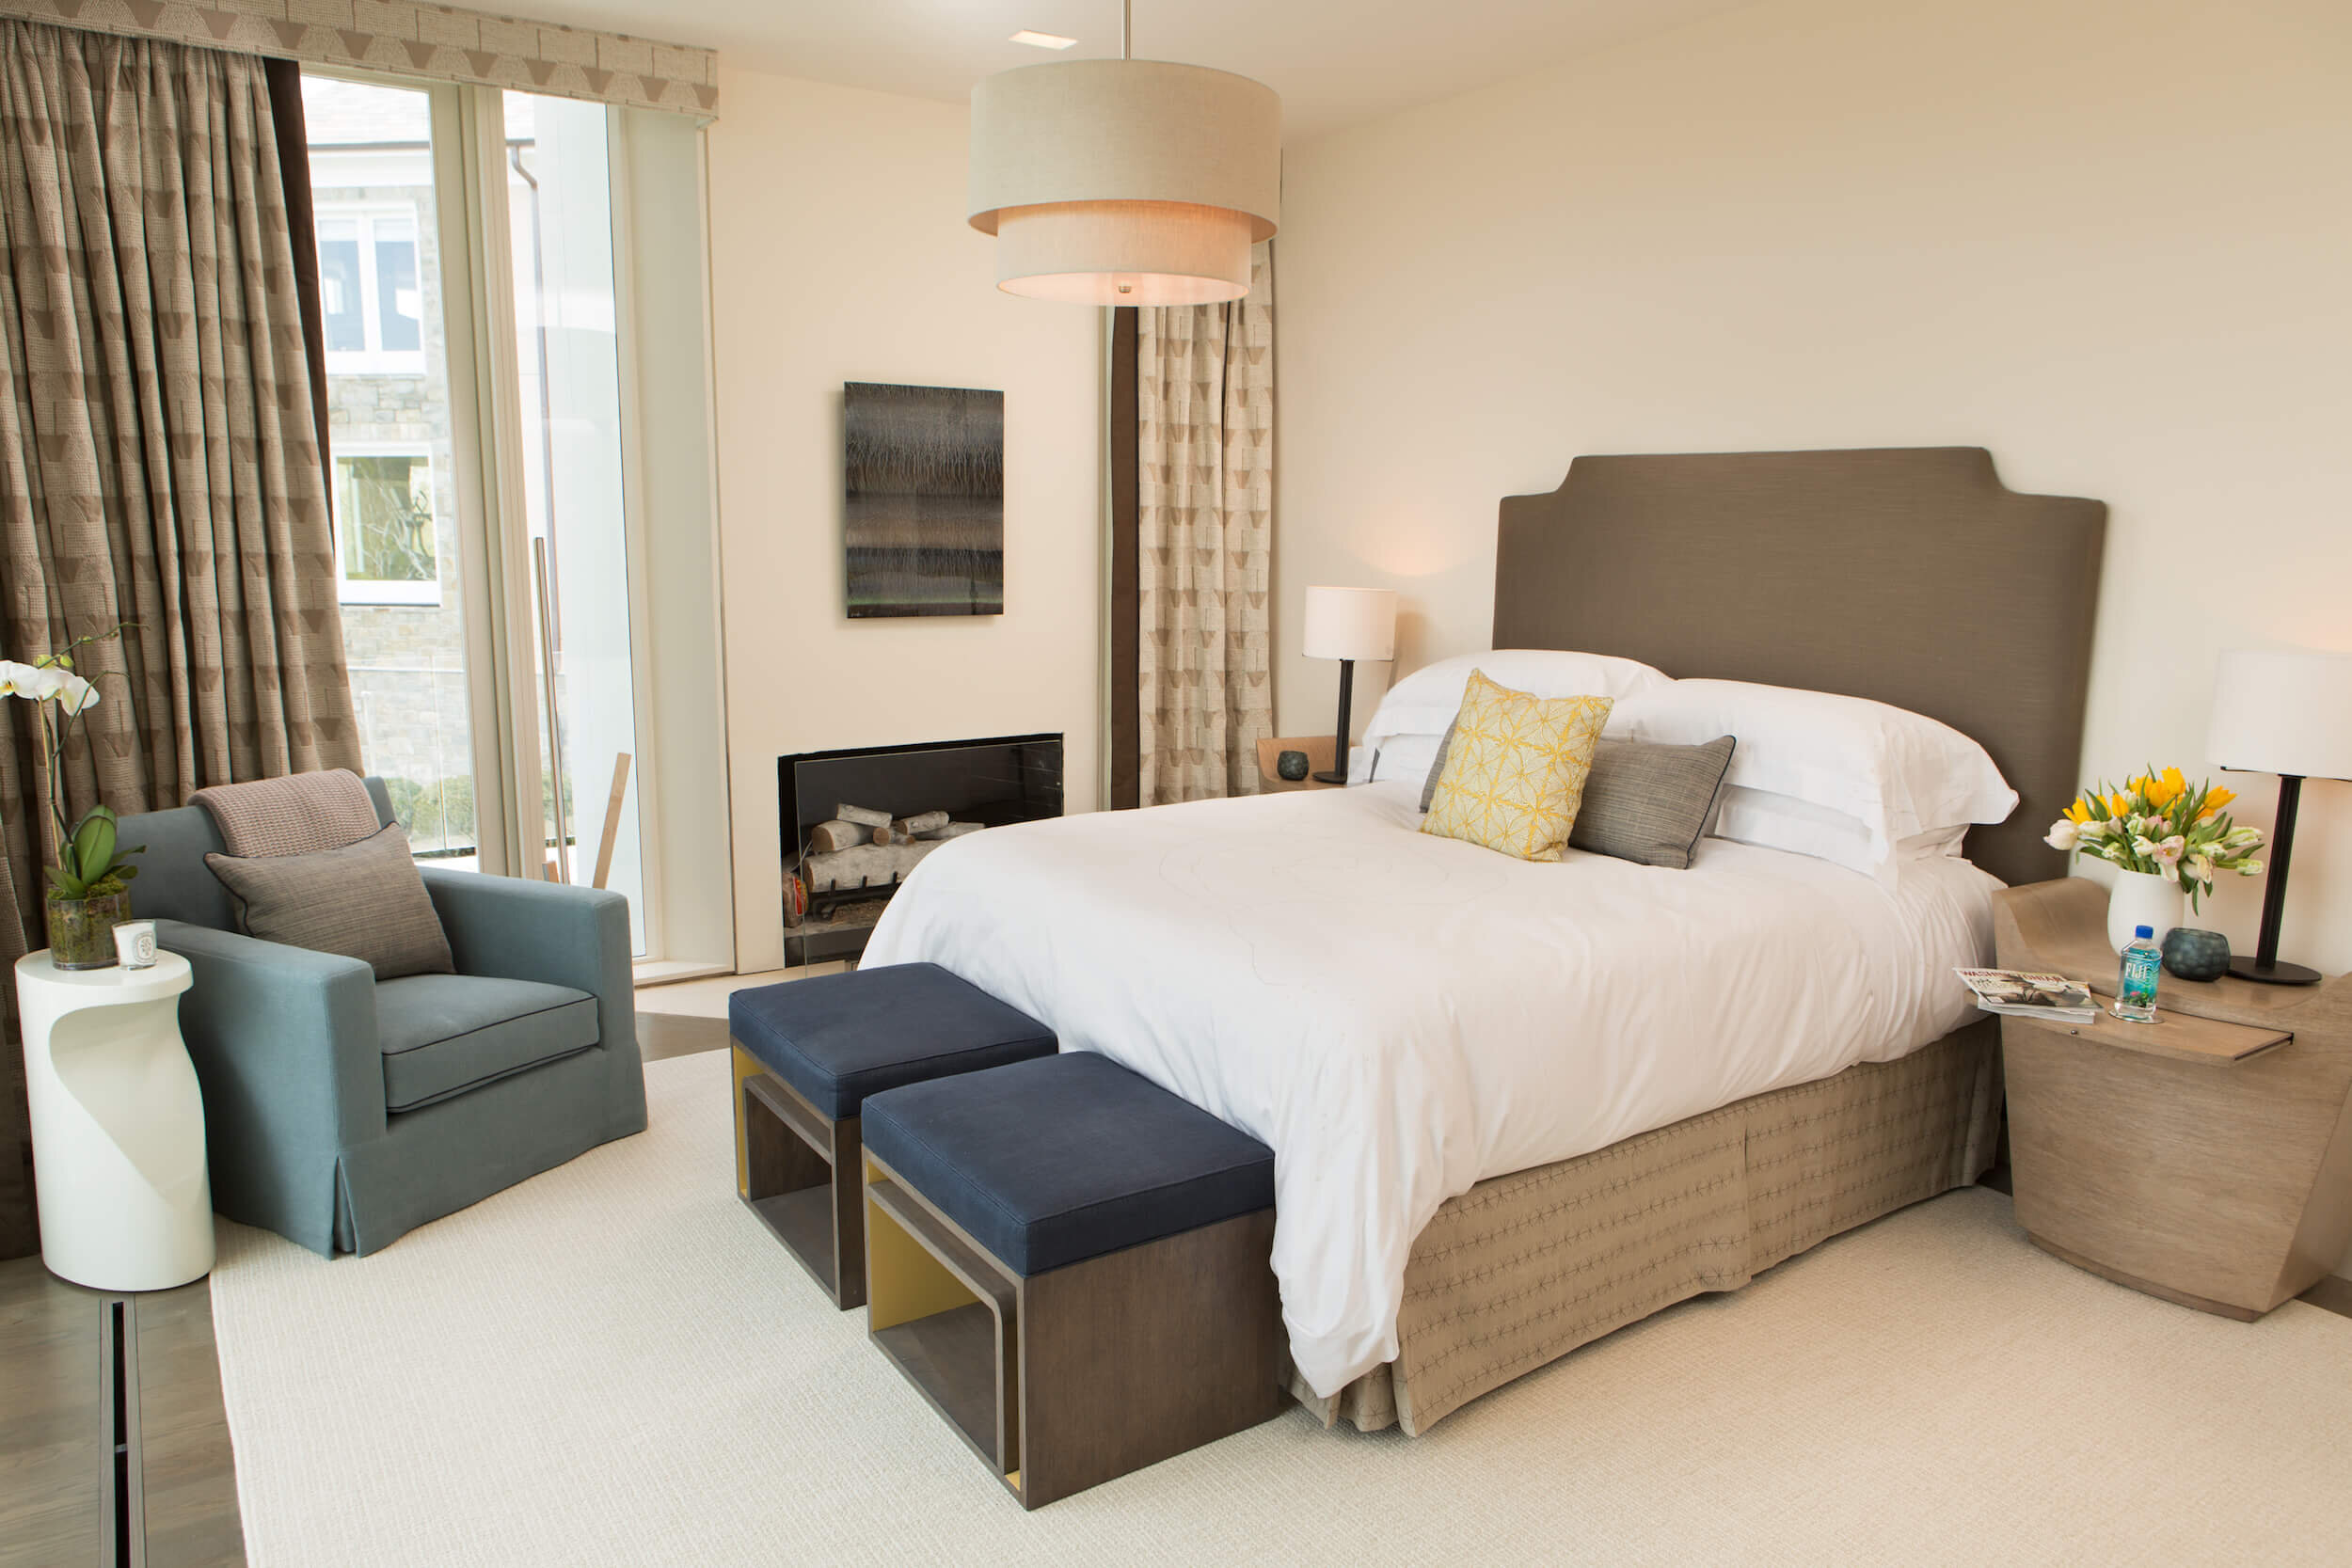 A Bedroom with an upholstered bed,  a contemporary chair in the corner and custom drapery 